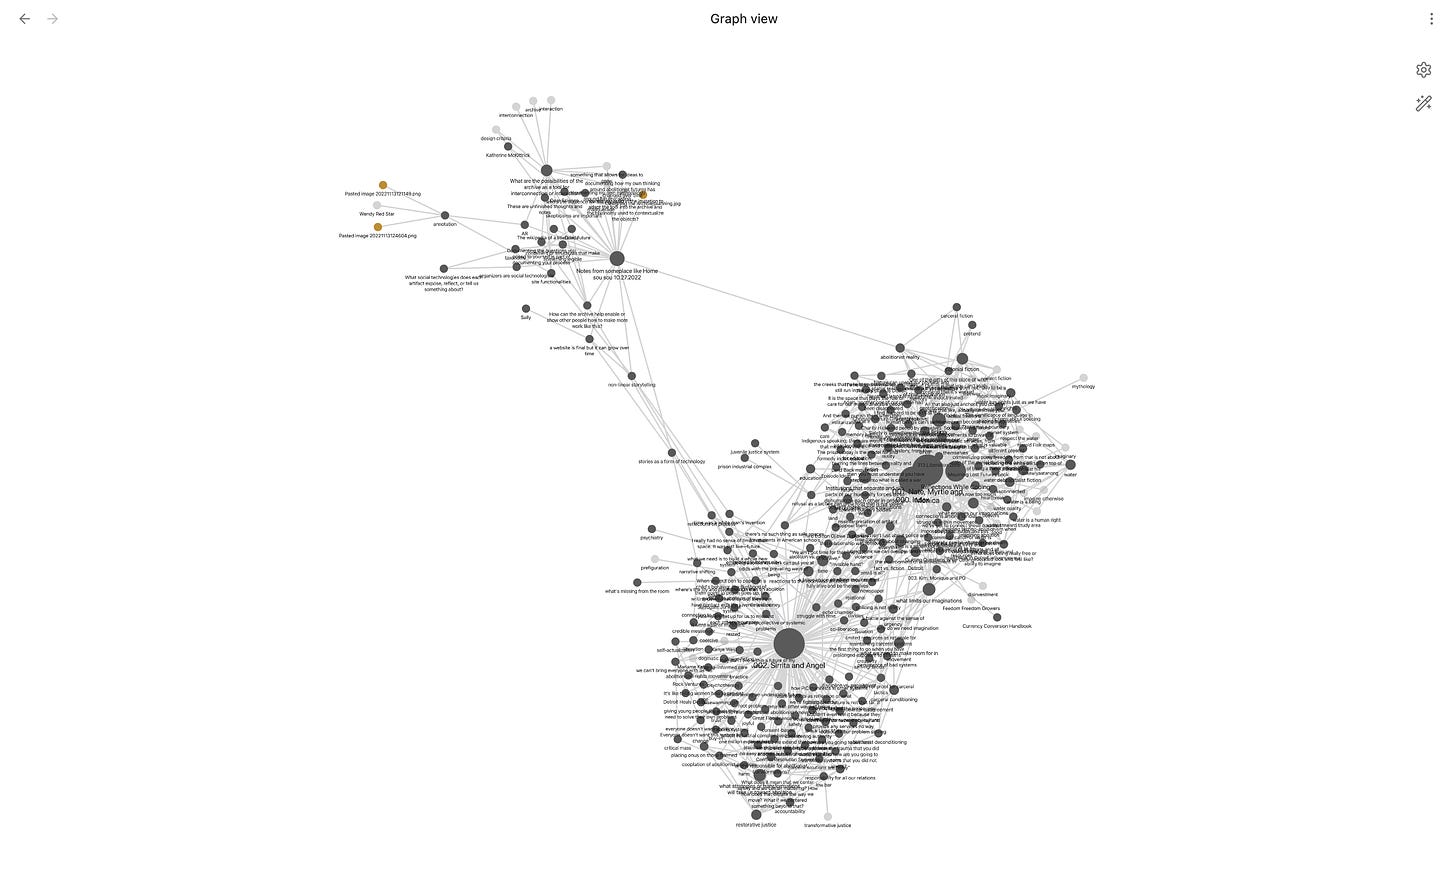 a full screenshot of a network map from Obsidian, showing lots of tiny nodes with connectors linking disparate concepts